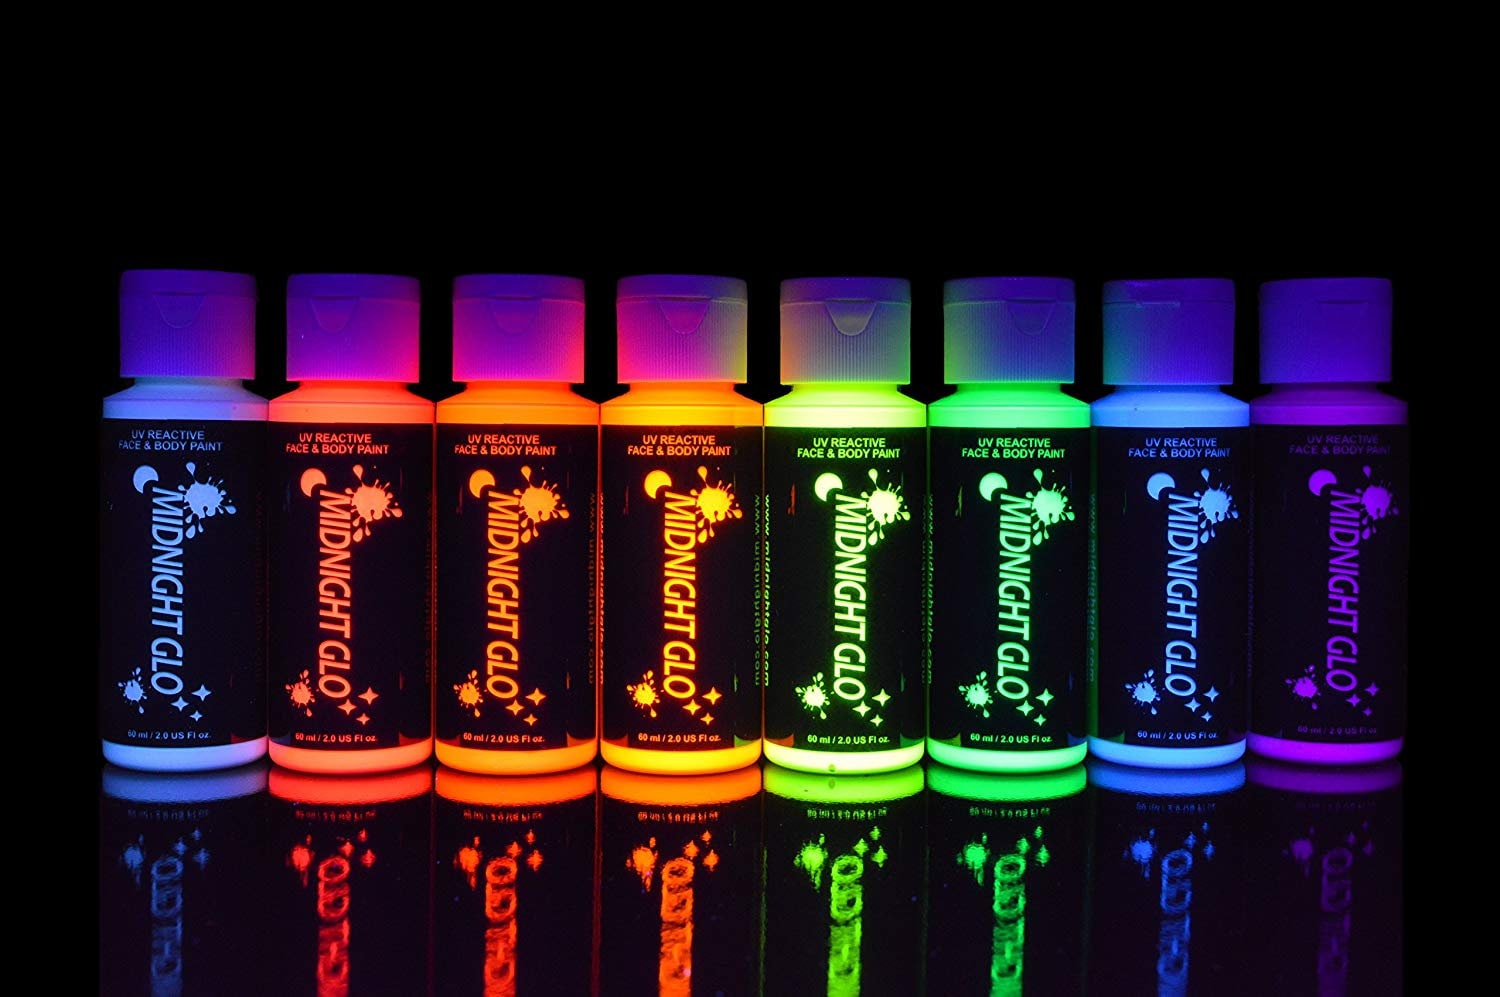 Glow in the Dark Acrylic Paint - Fluorescent Paint for Canvas - Neon Craft  Paint - Blacklight Paint Set – Art Supplies for Adults - Gift for Artists